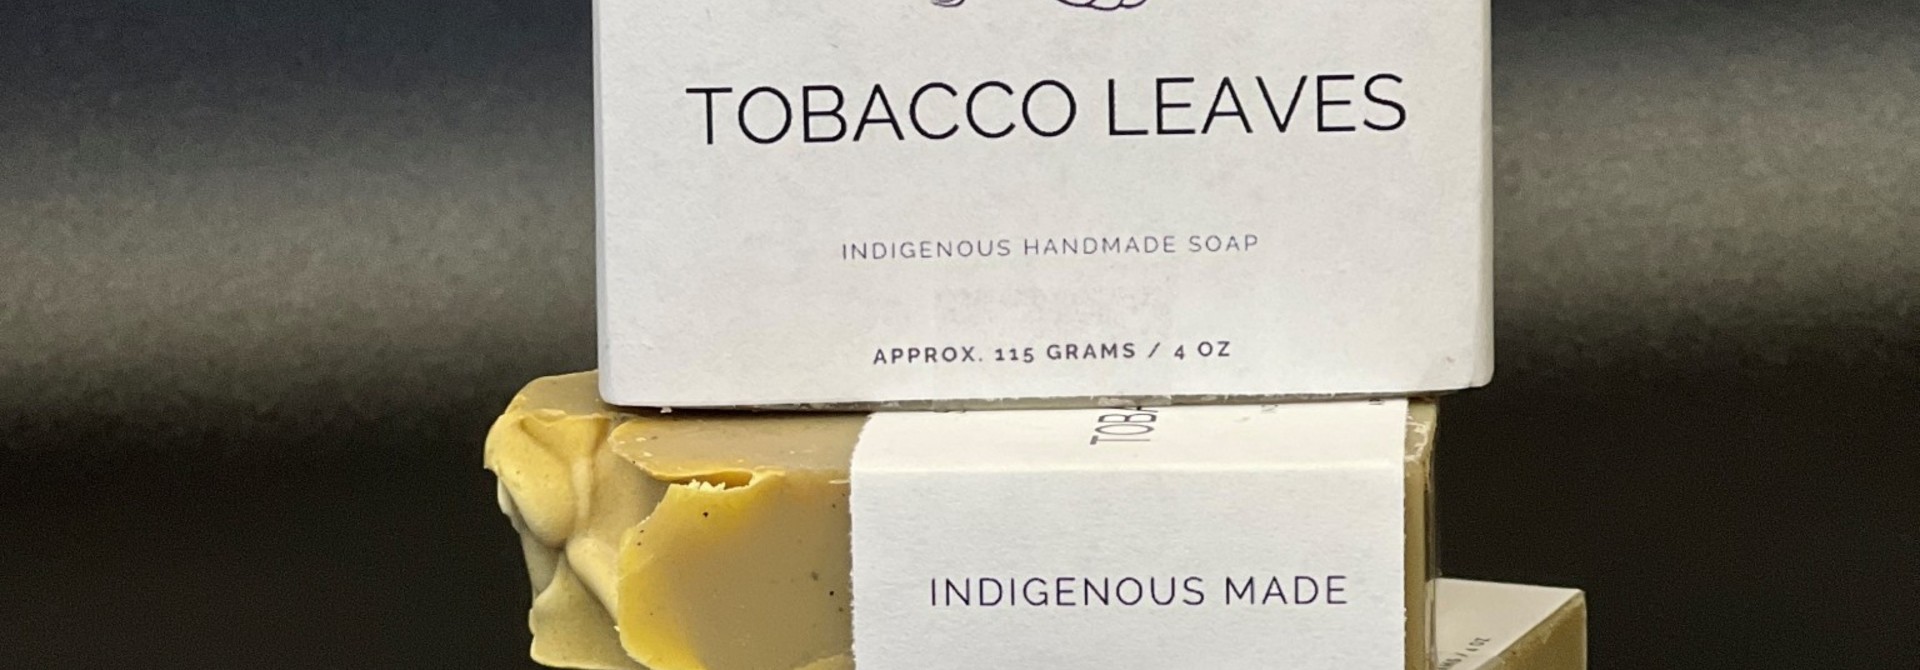 4oz soap Tobacco Leaves by  Sweetgrass soap